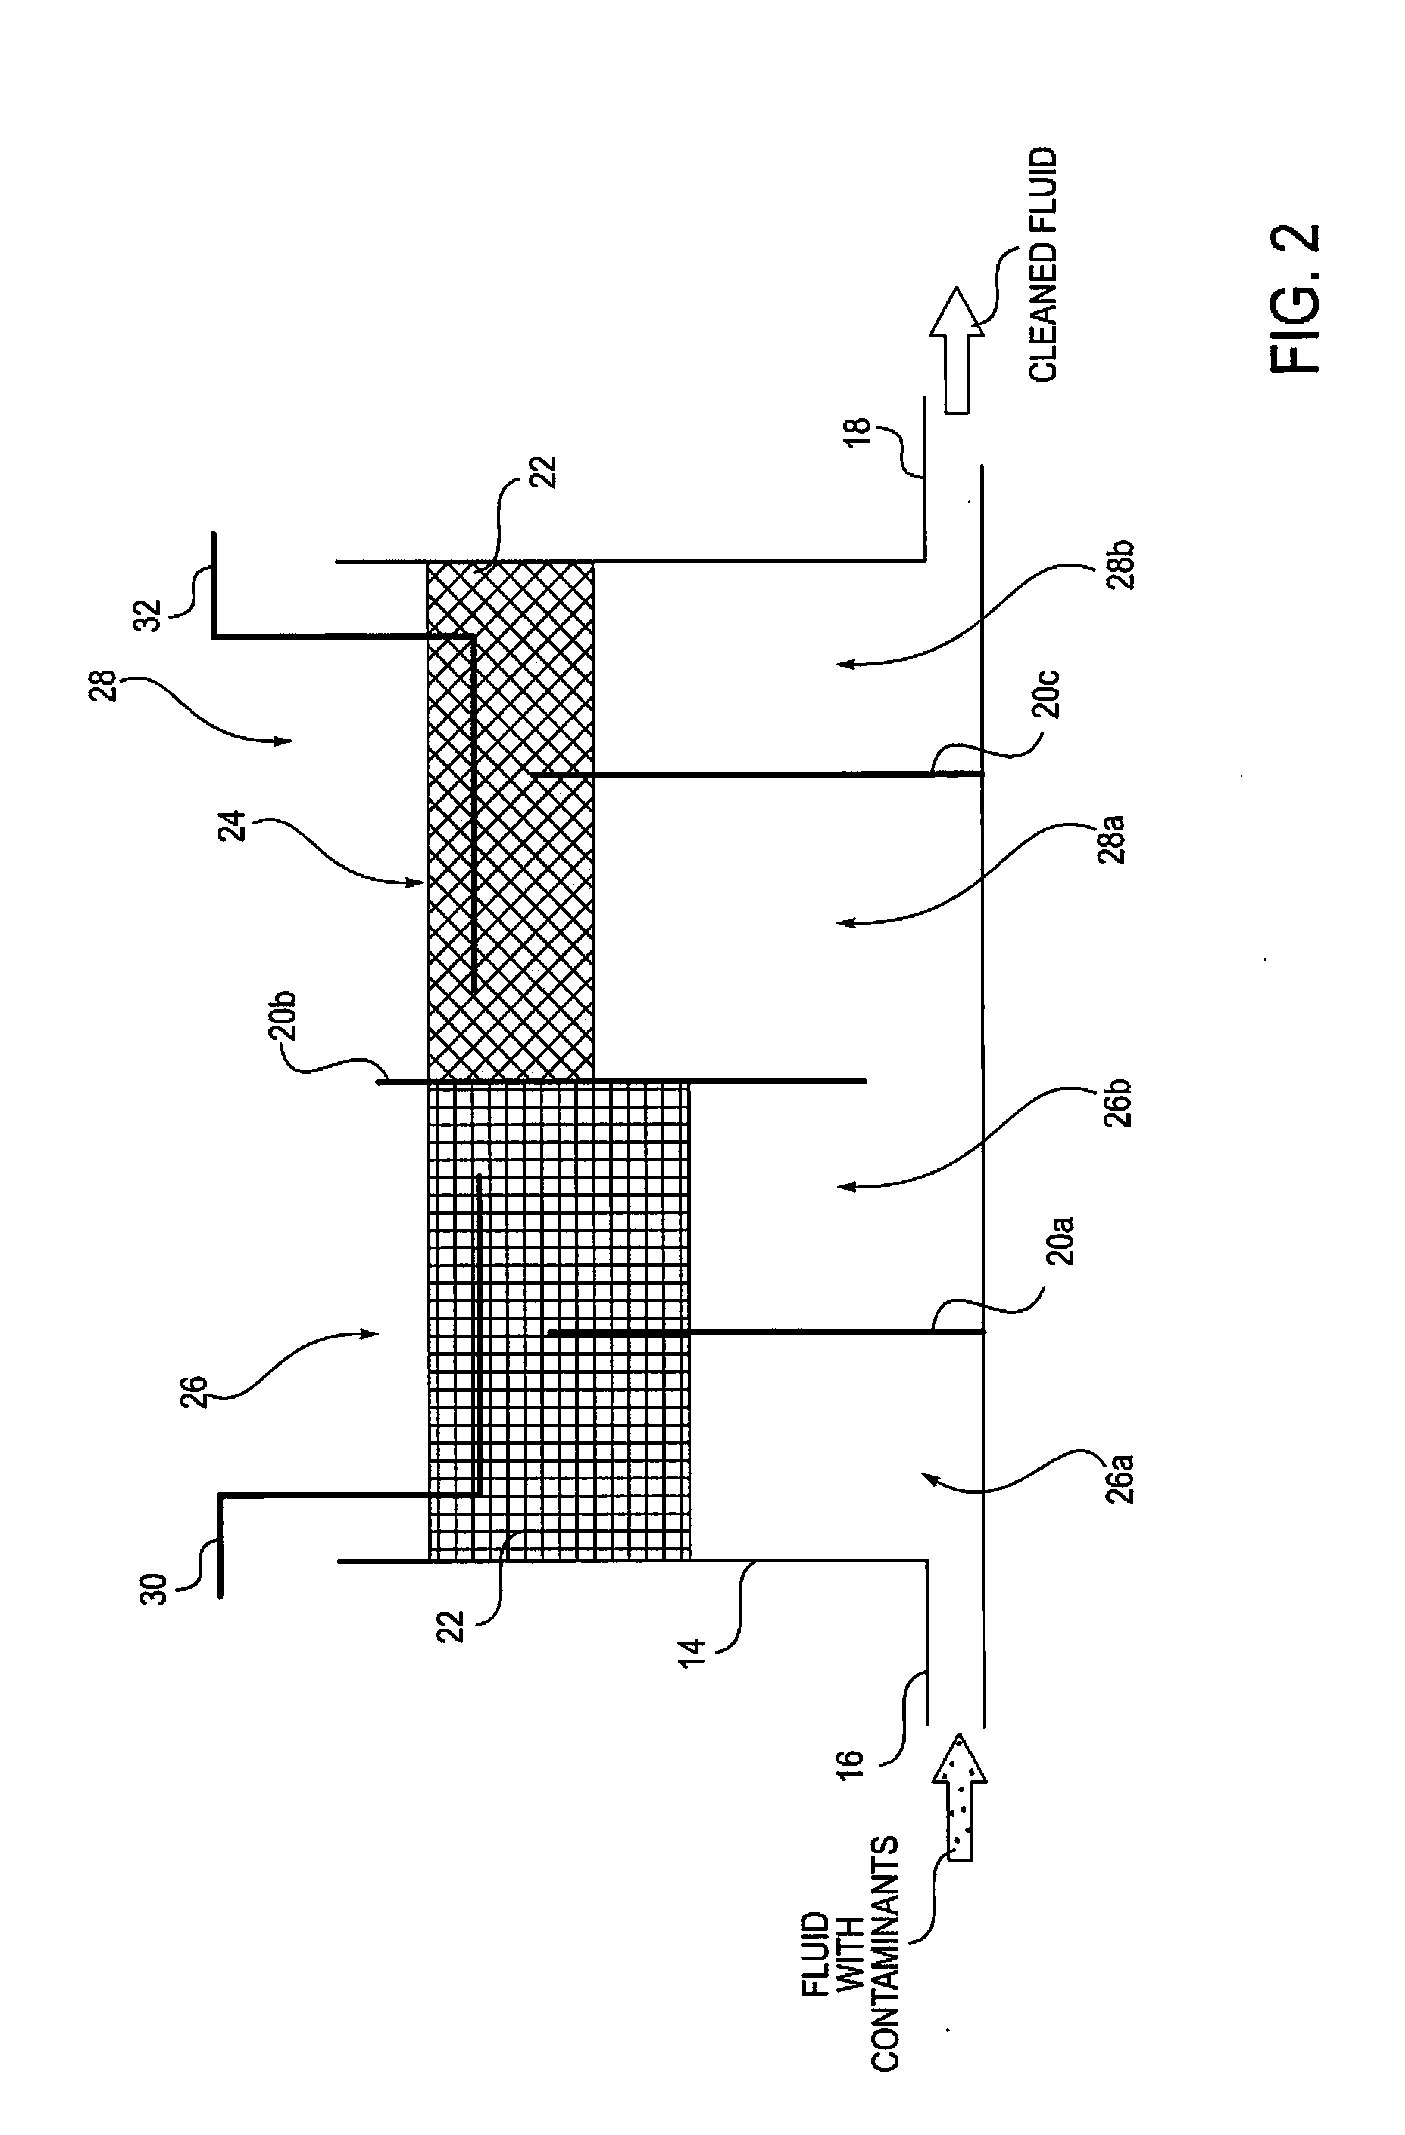 Method and system for removing contaminants from a fluid